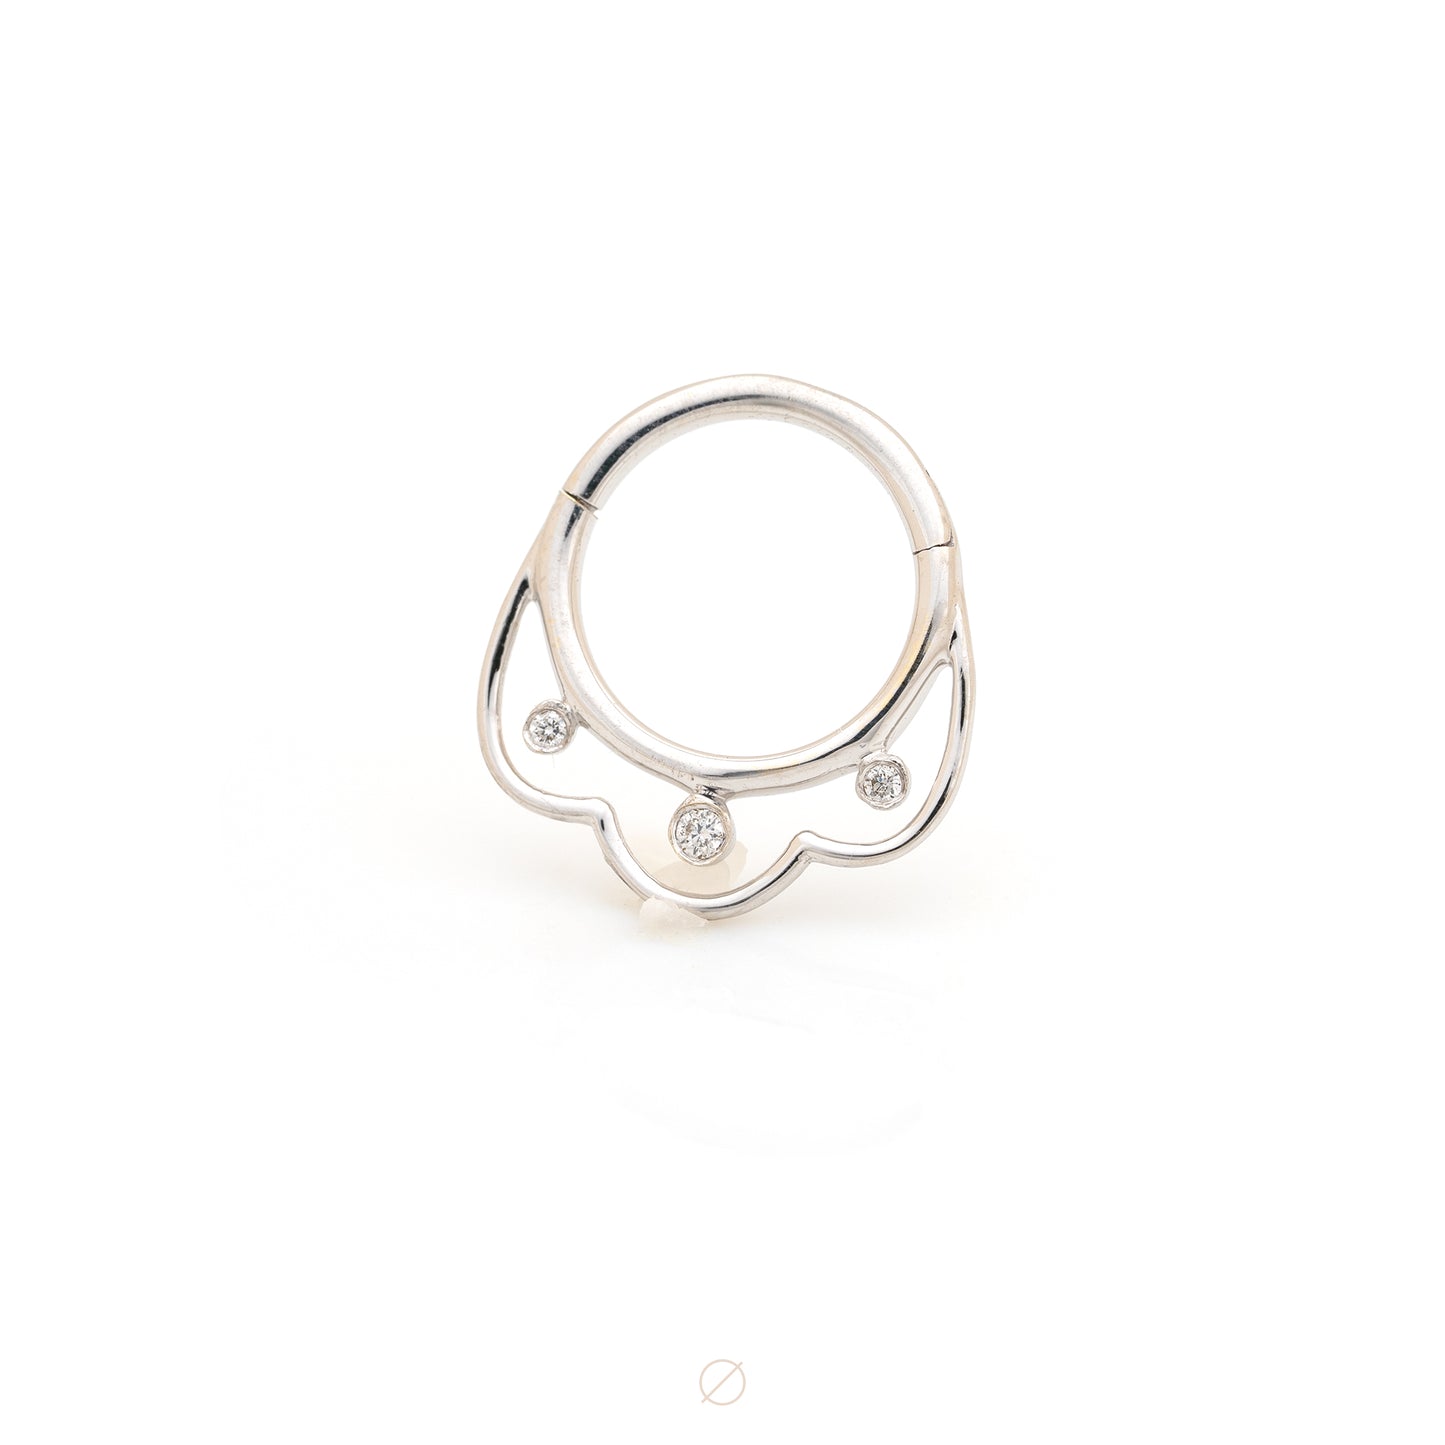 Interiority 3 with Diamonds Easy Ring by Pupil Hall